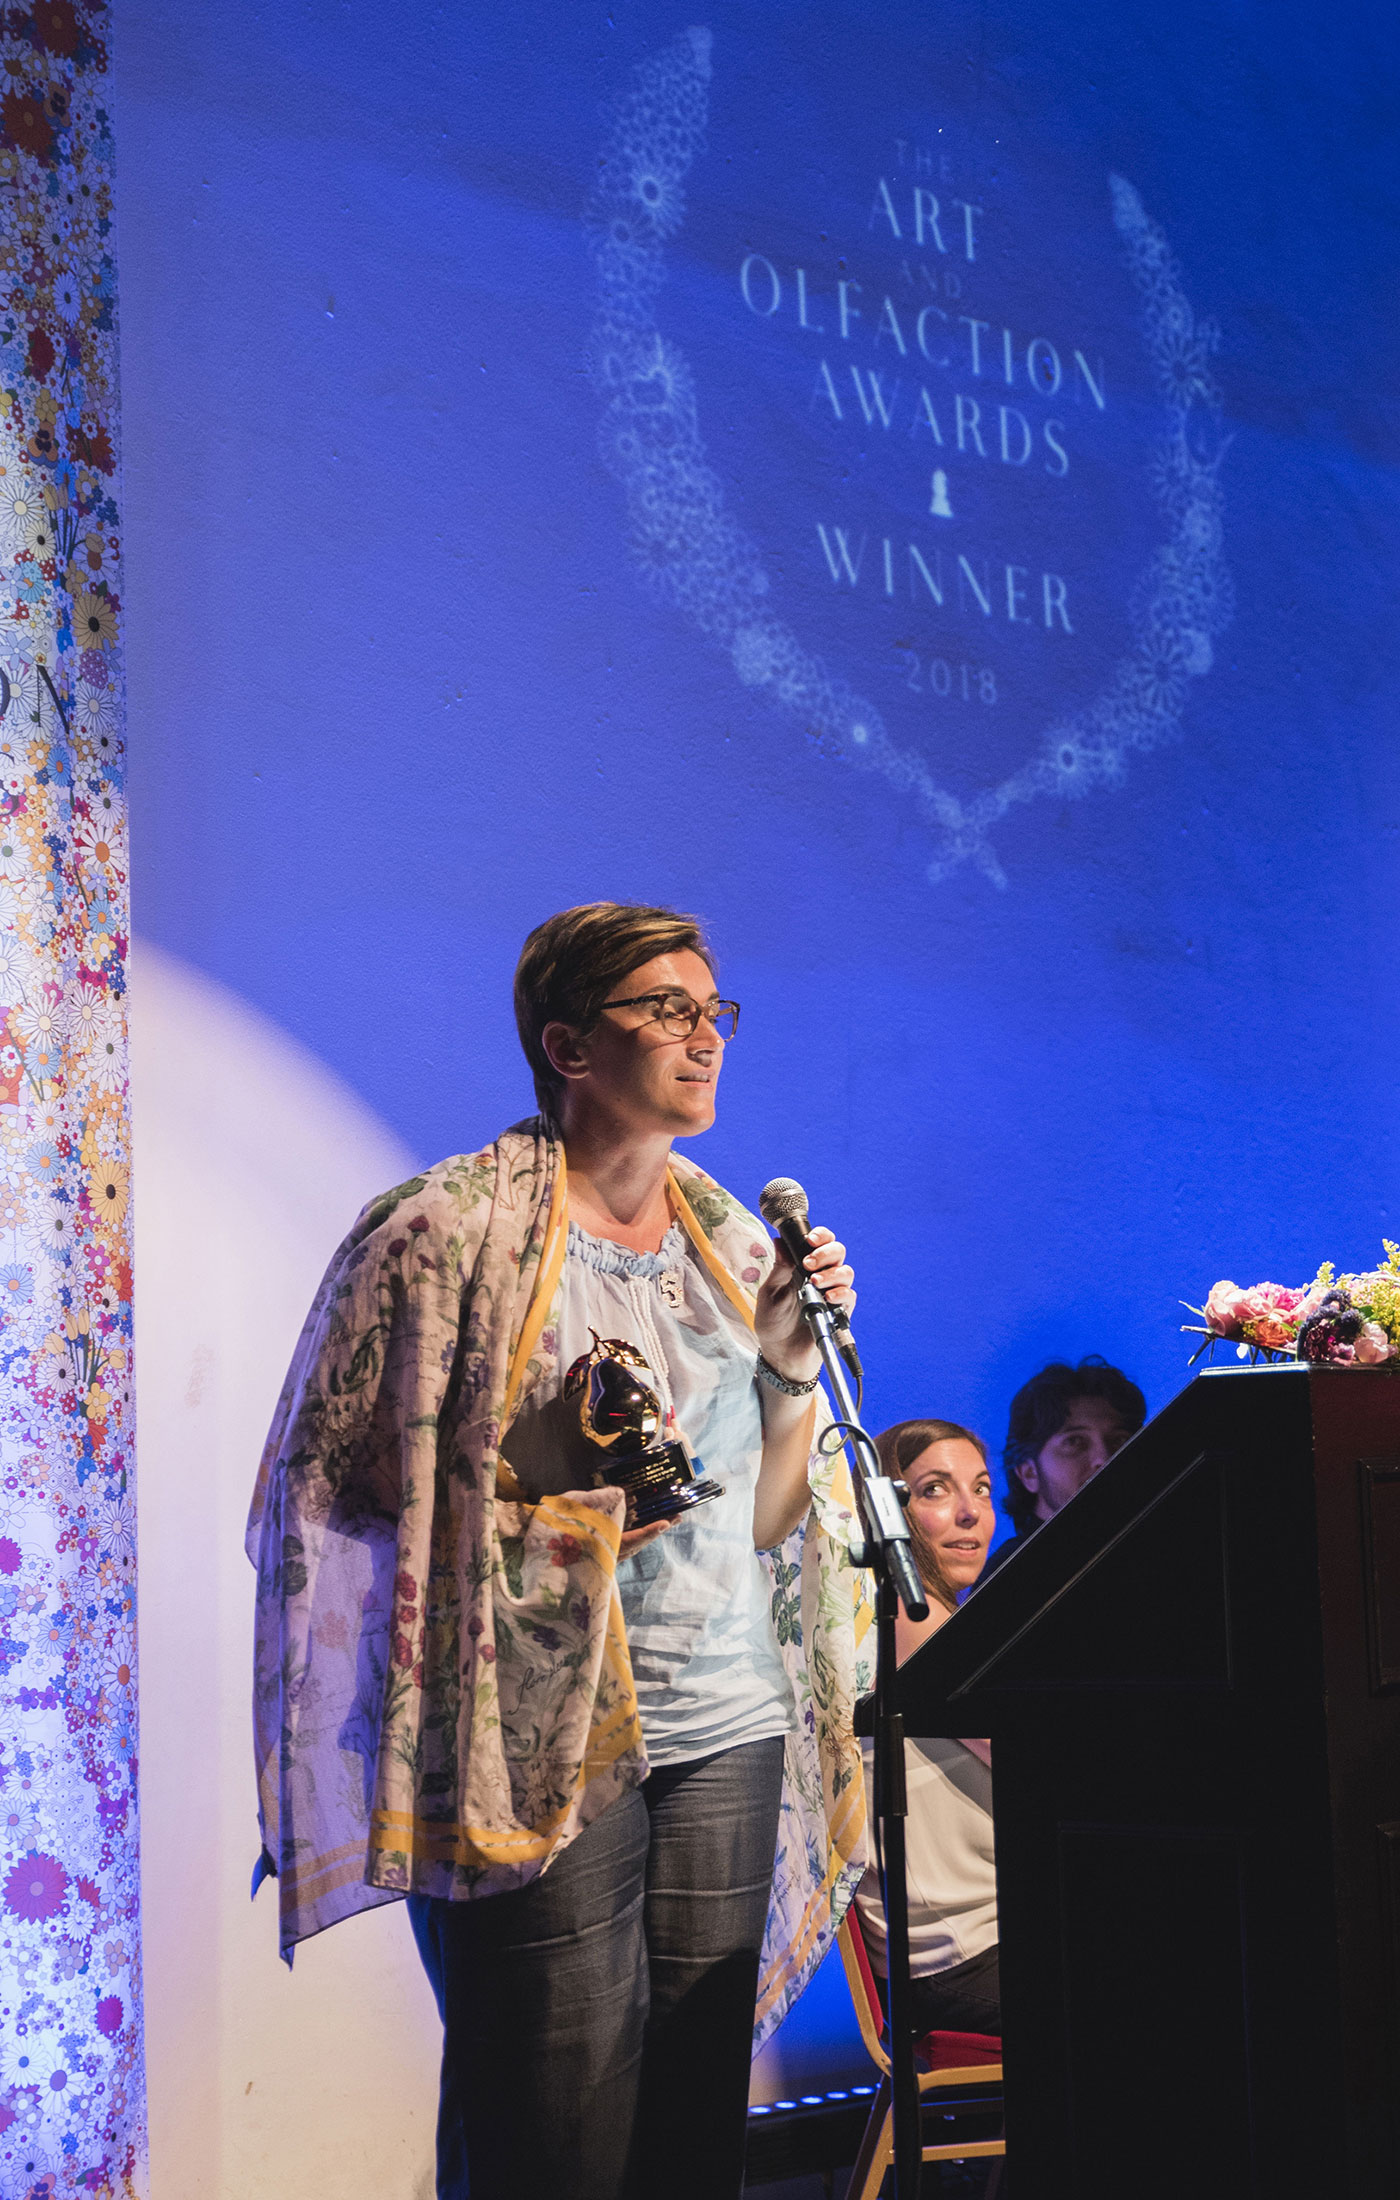 Virginie Roux, at The Art and Olfaction Awards, Photo by Marina Chichi